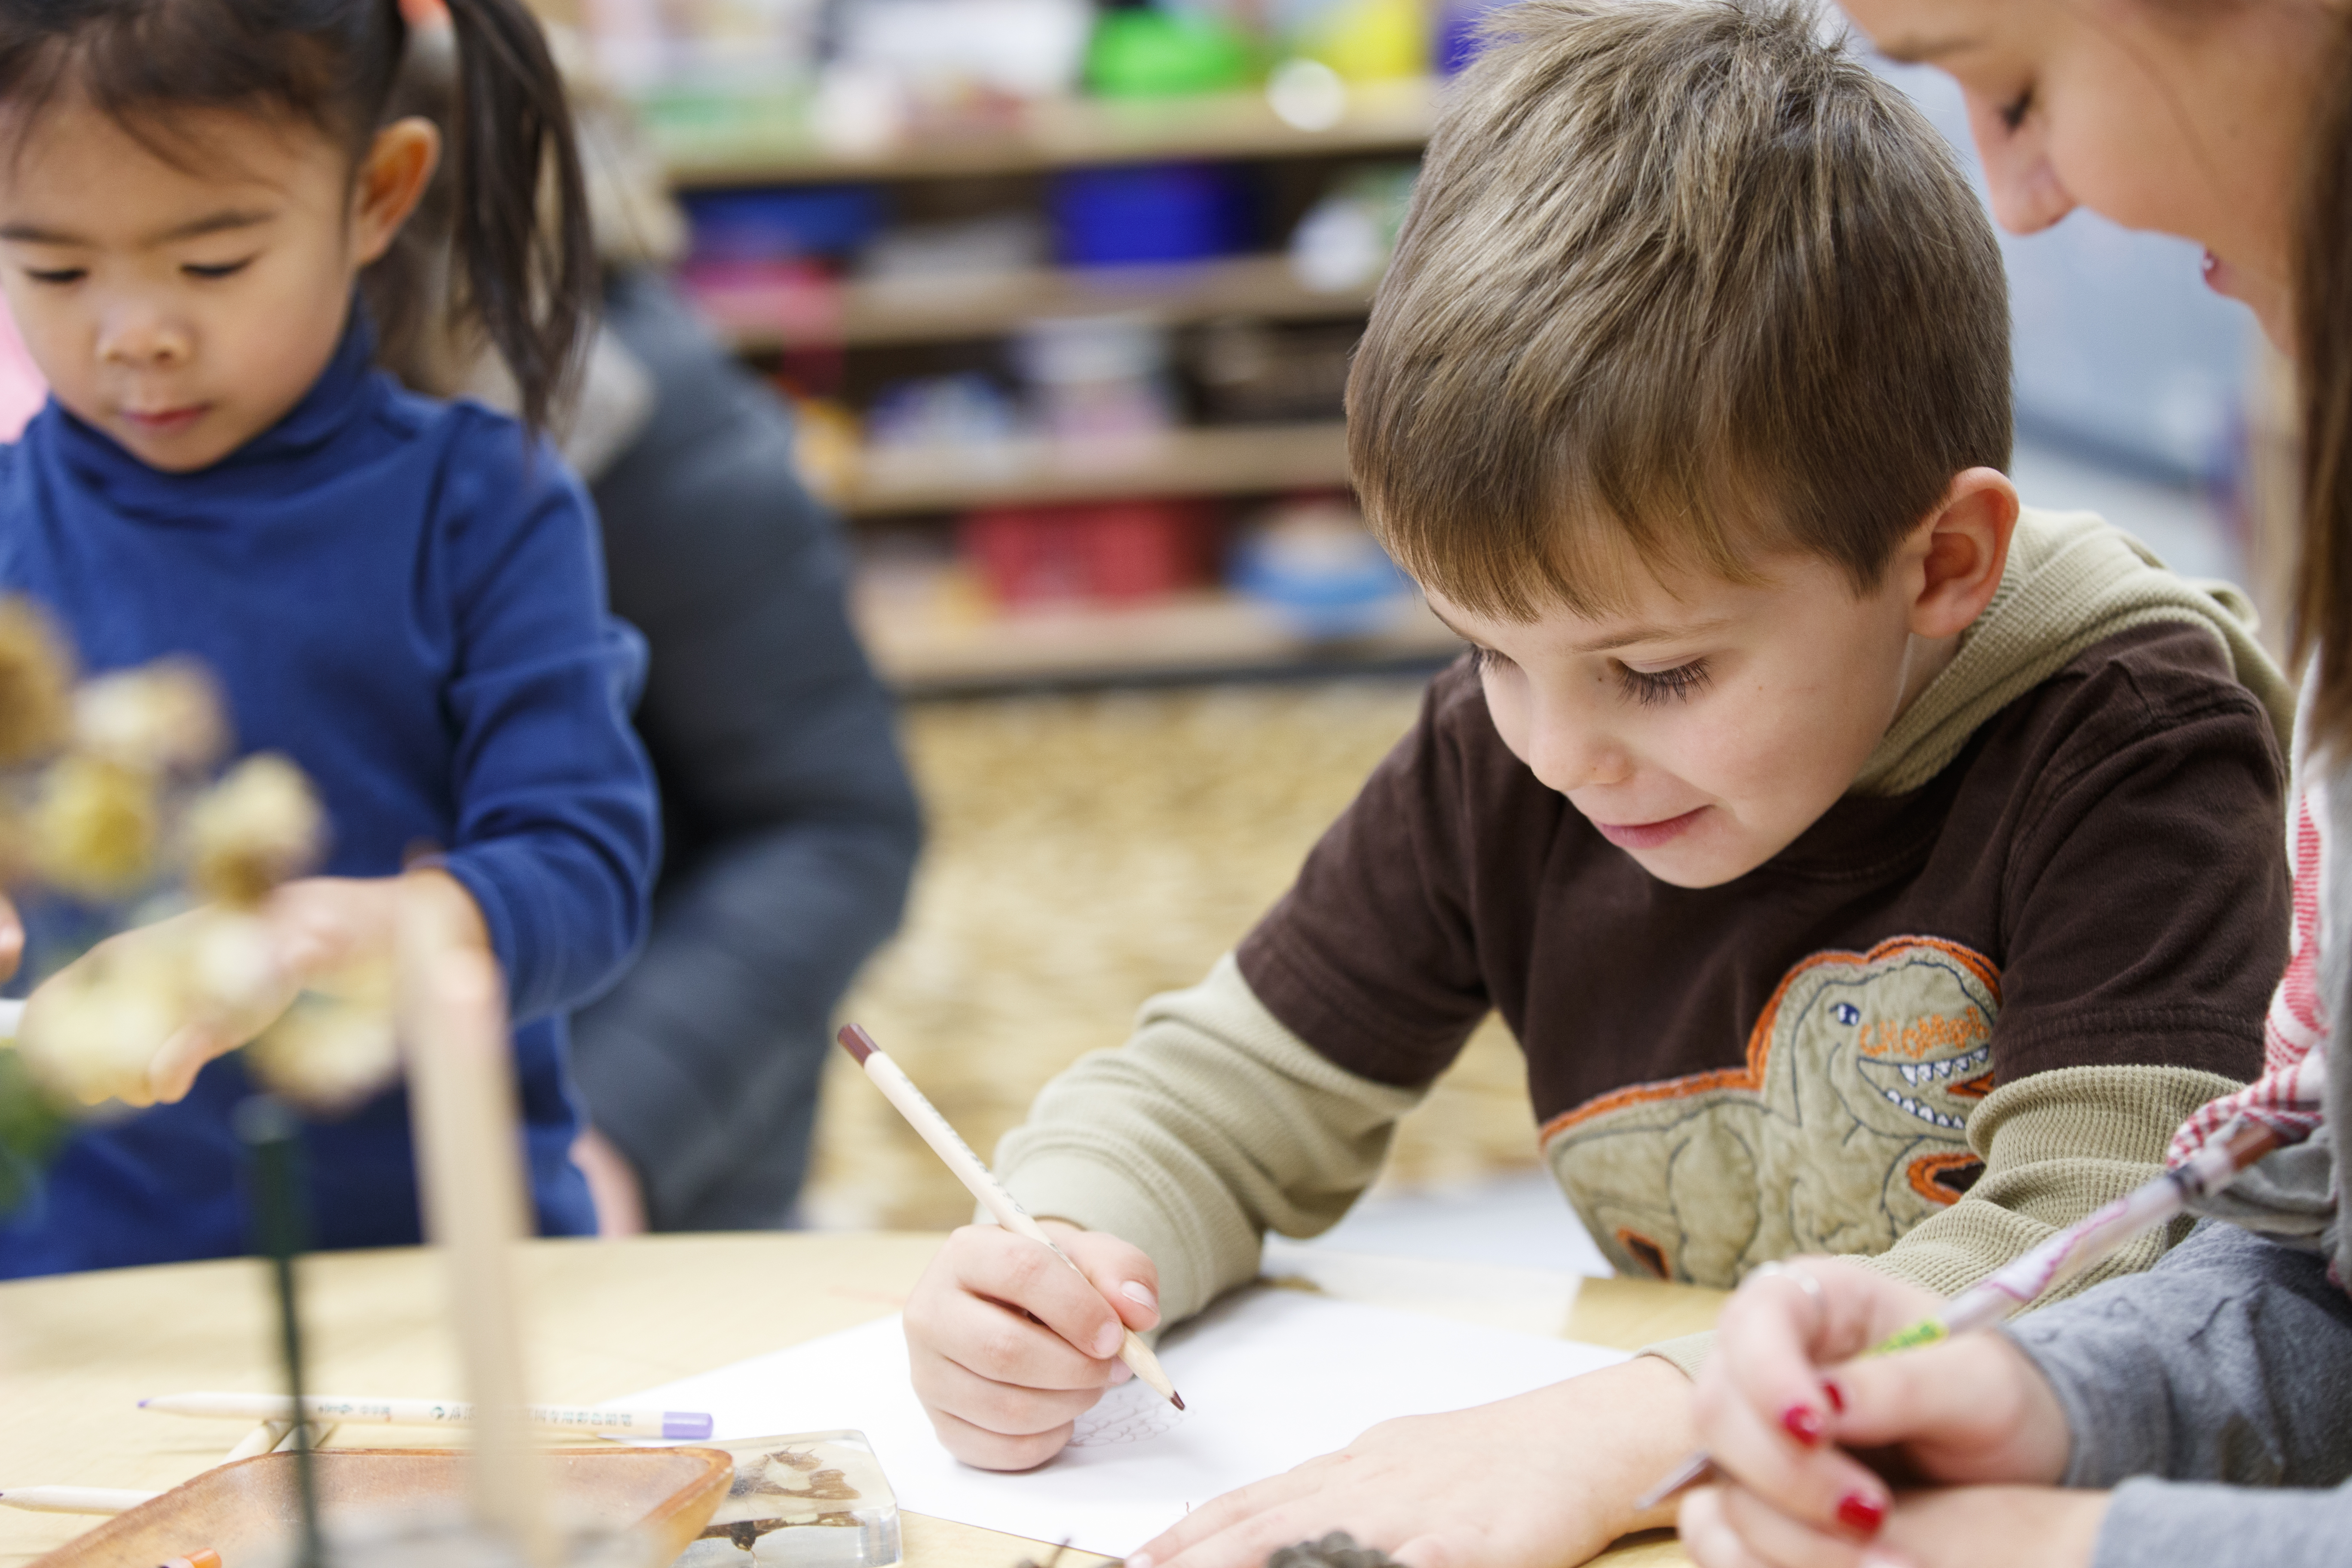 A student works with a child at the Ruth Staples Child Development Laboratory